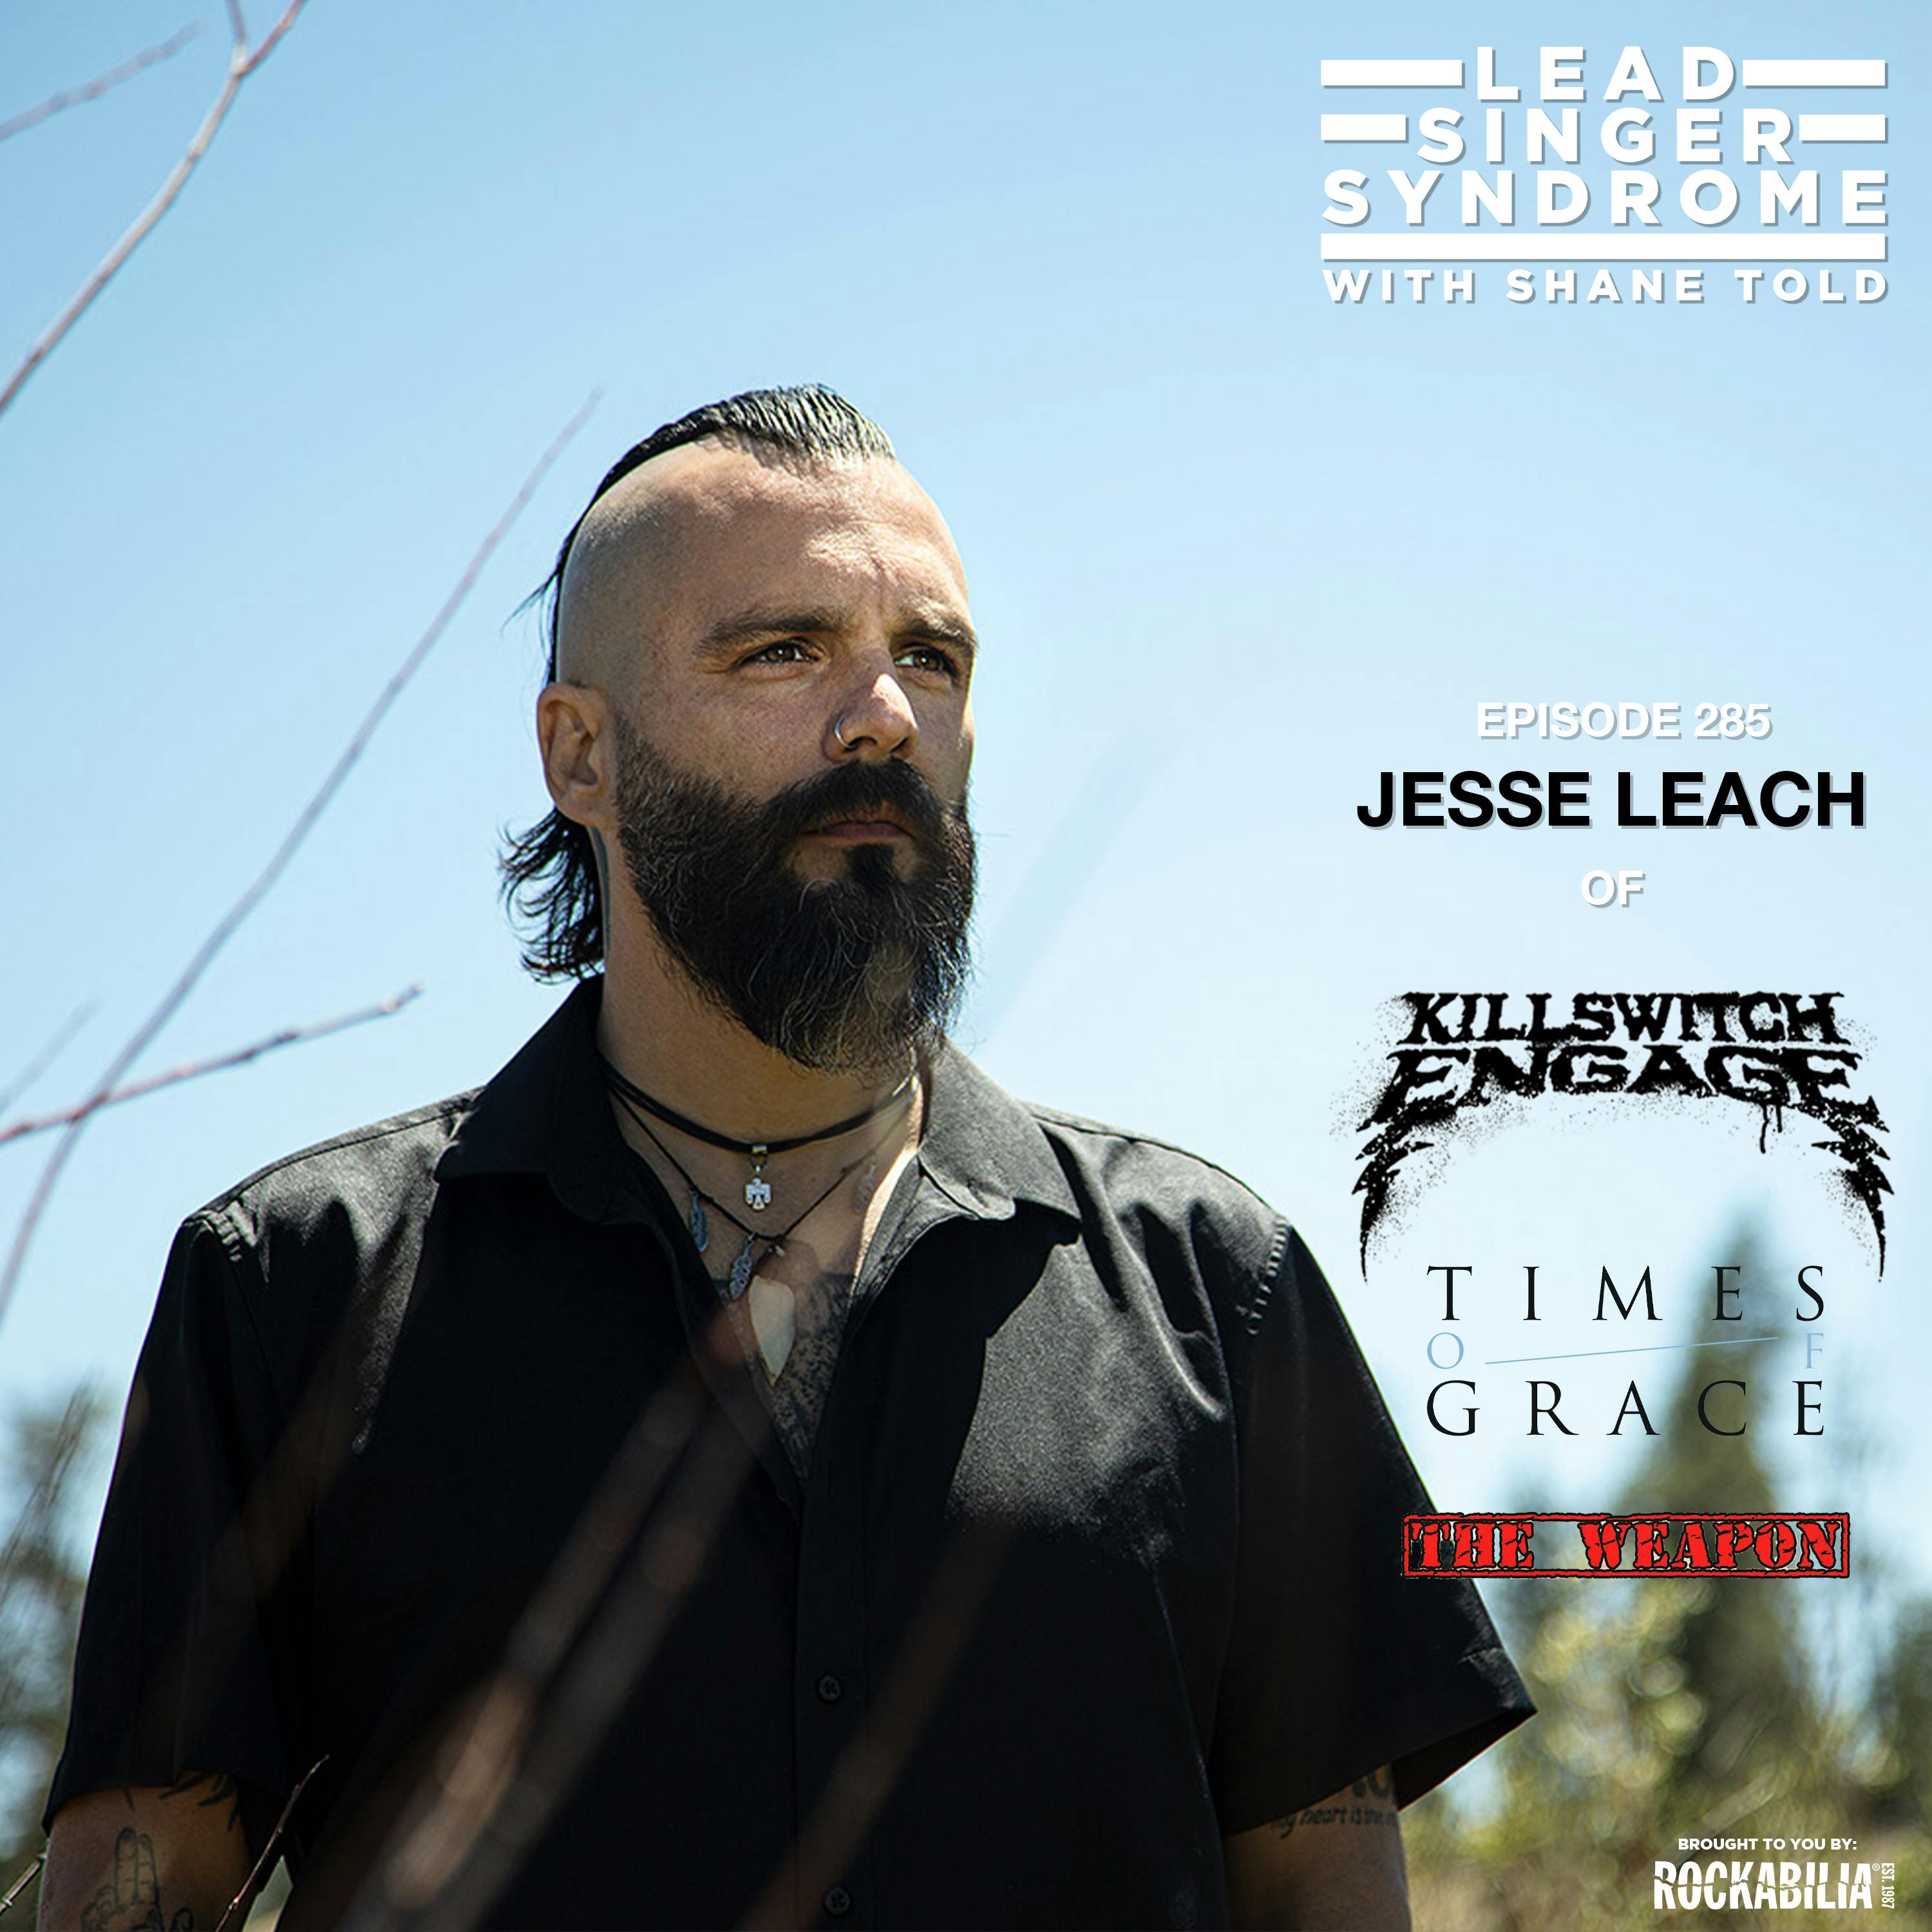 Jesse Leach (Killswitch Engage, Times of Grace, The Weapon) - Lead Singer  Syndrome with Shane Told, Lyssna här